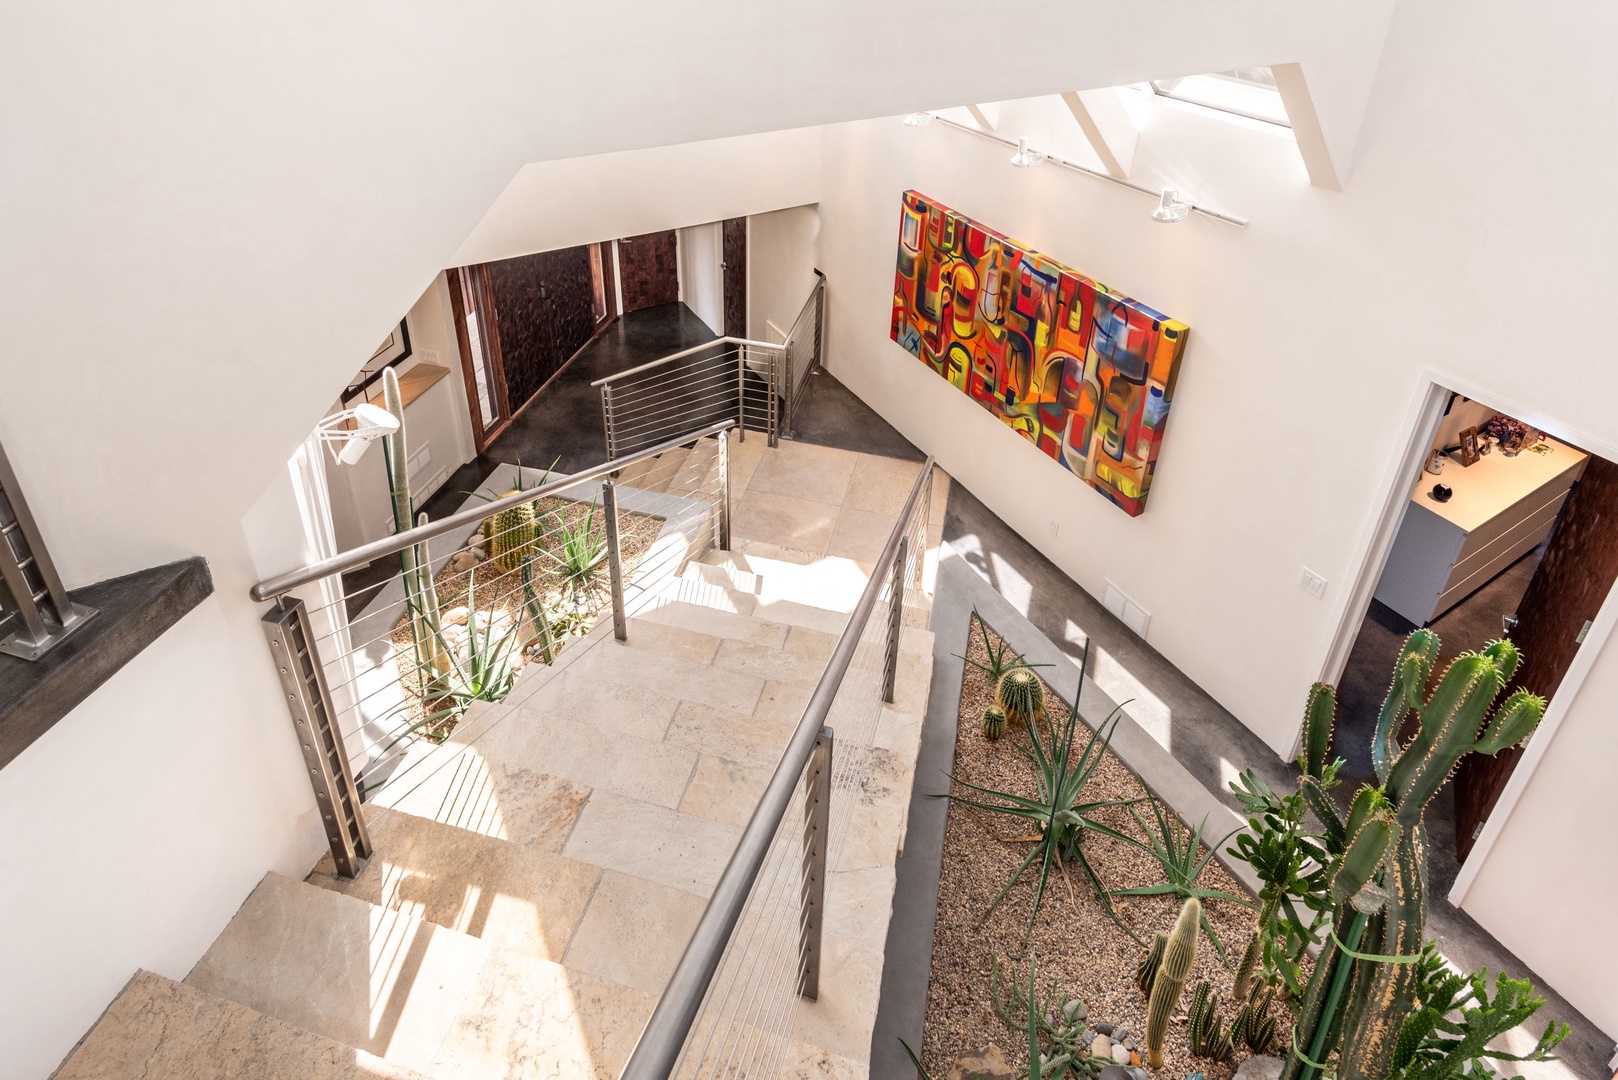 Ascend the Insta-worthy staircase to reach the stunning second floor